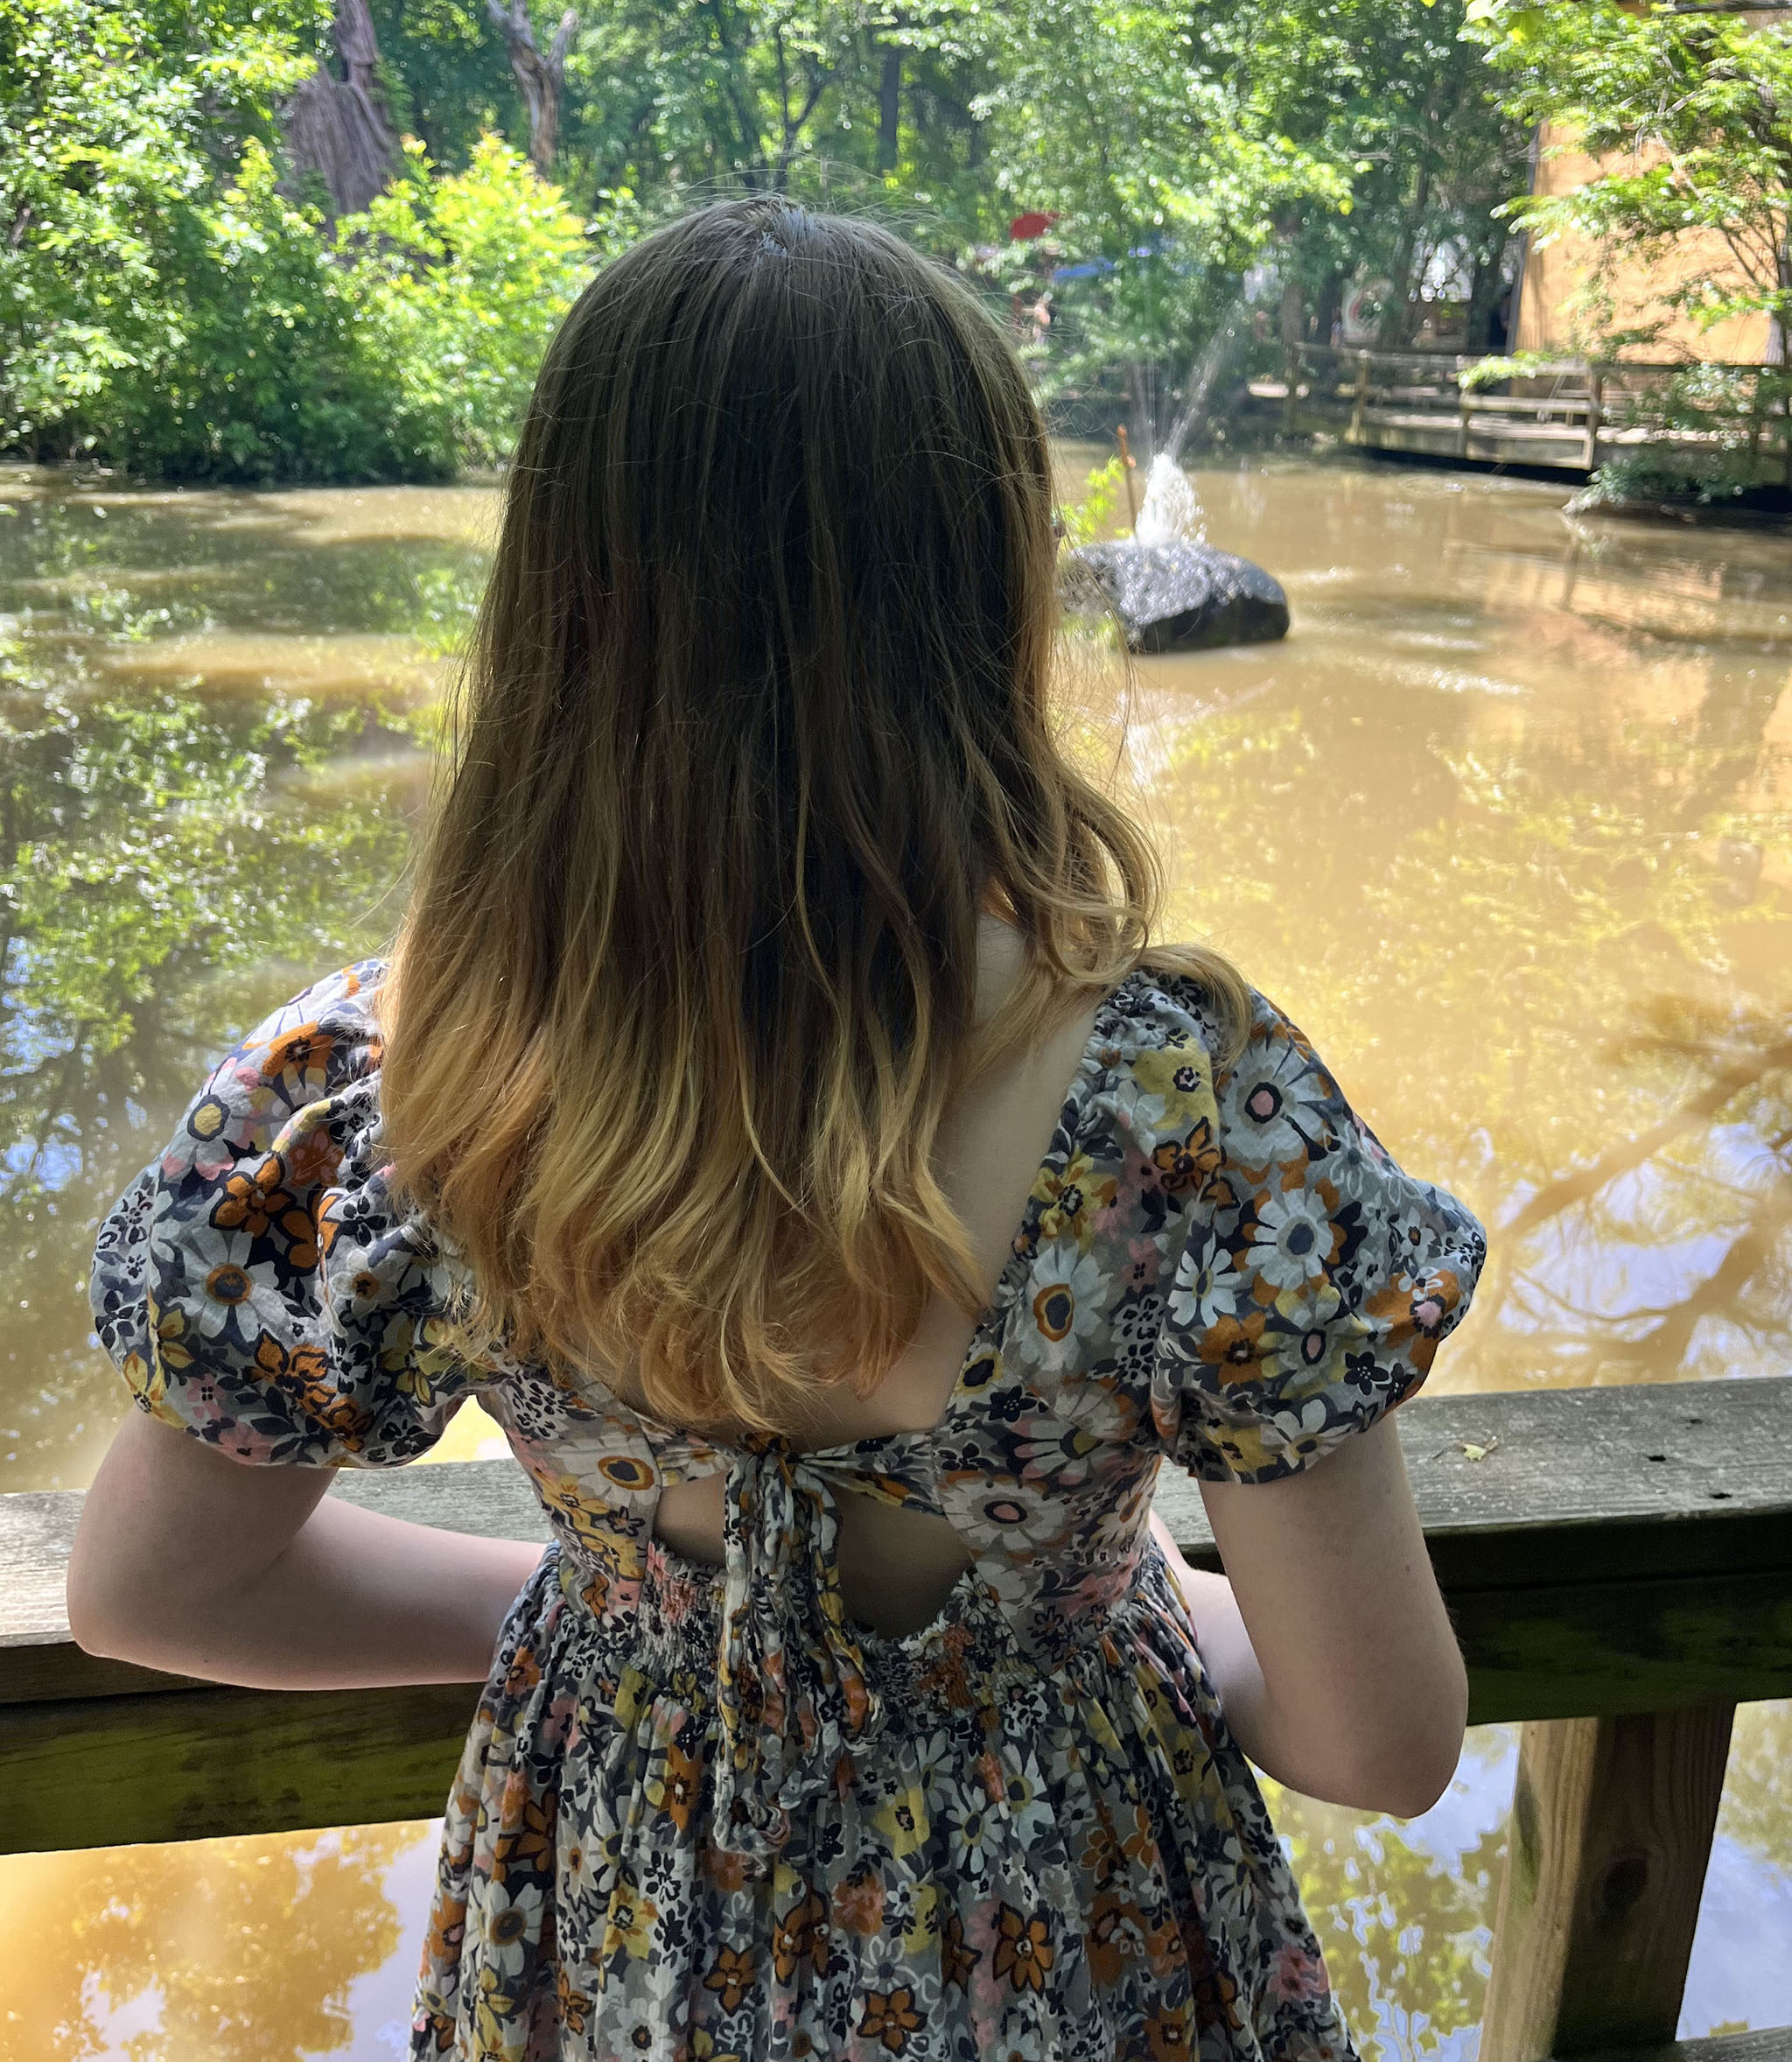 Girl with long brown hair, wearing a dress, looks out over a pond in a wooded area